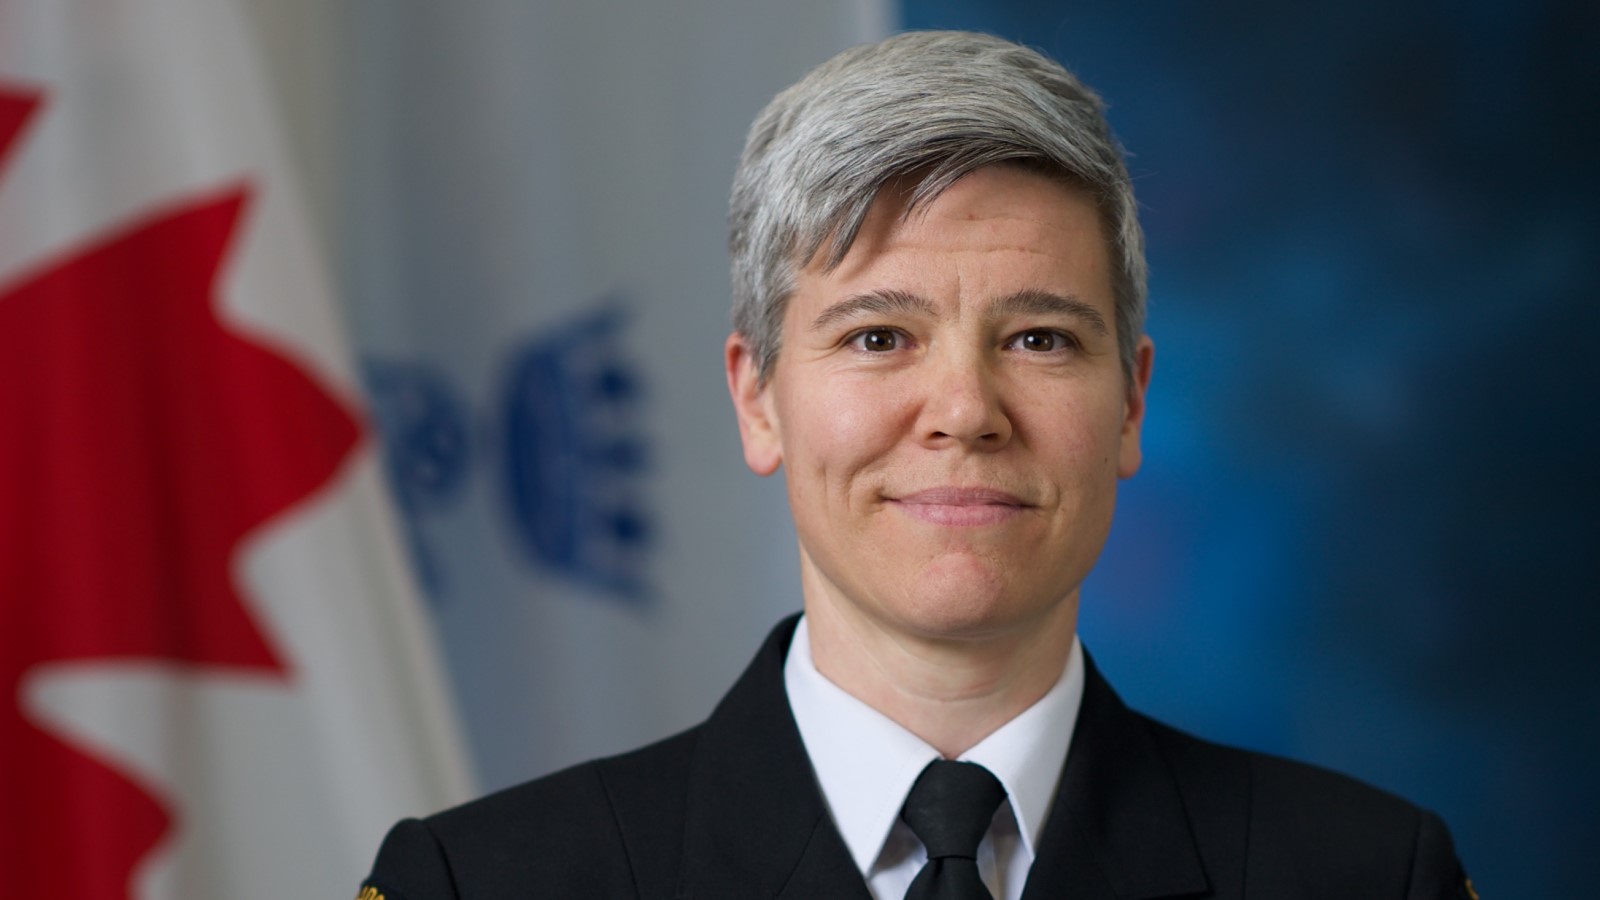 LCdr Sarah Stainton